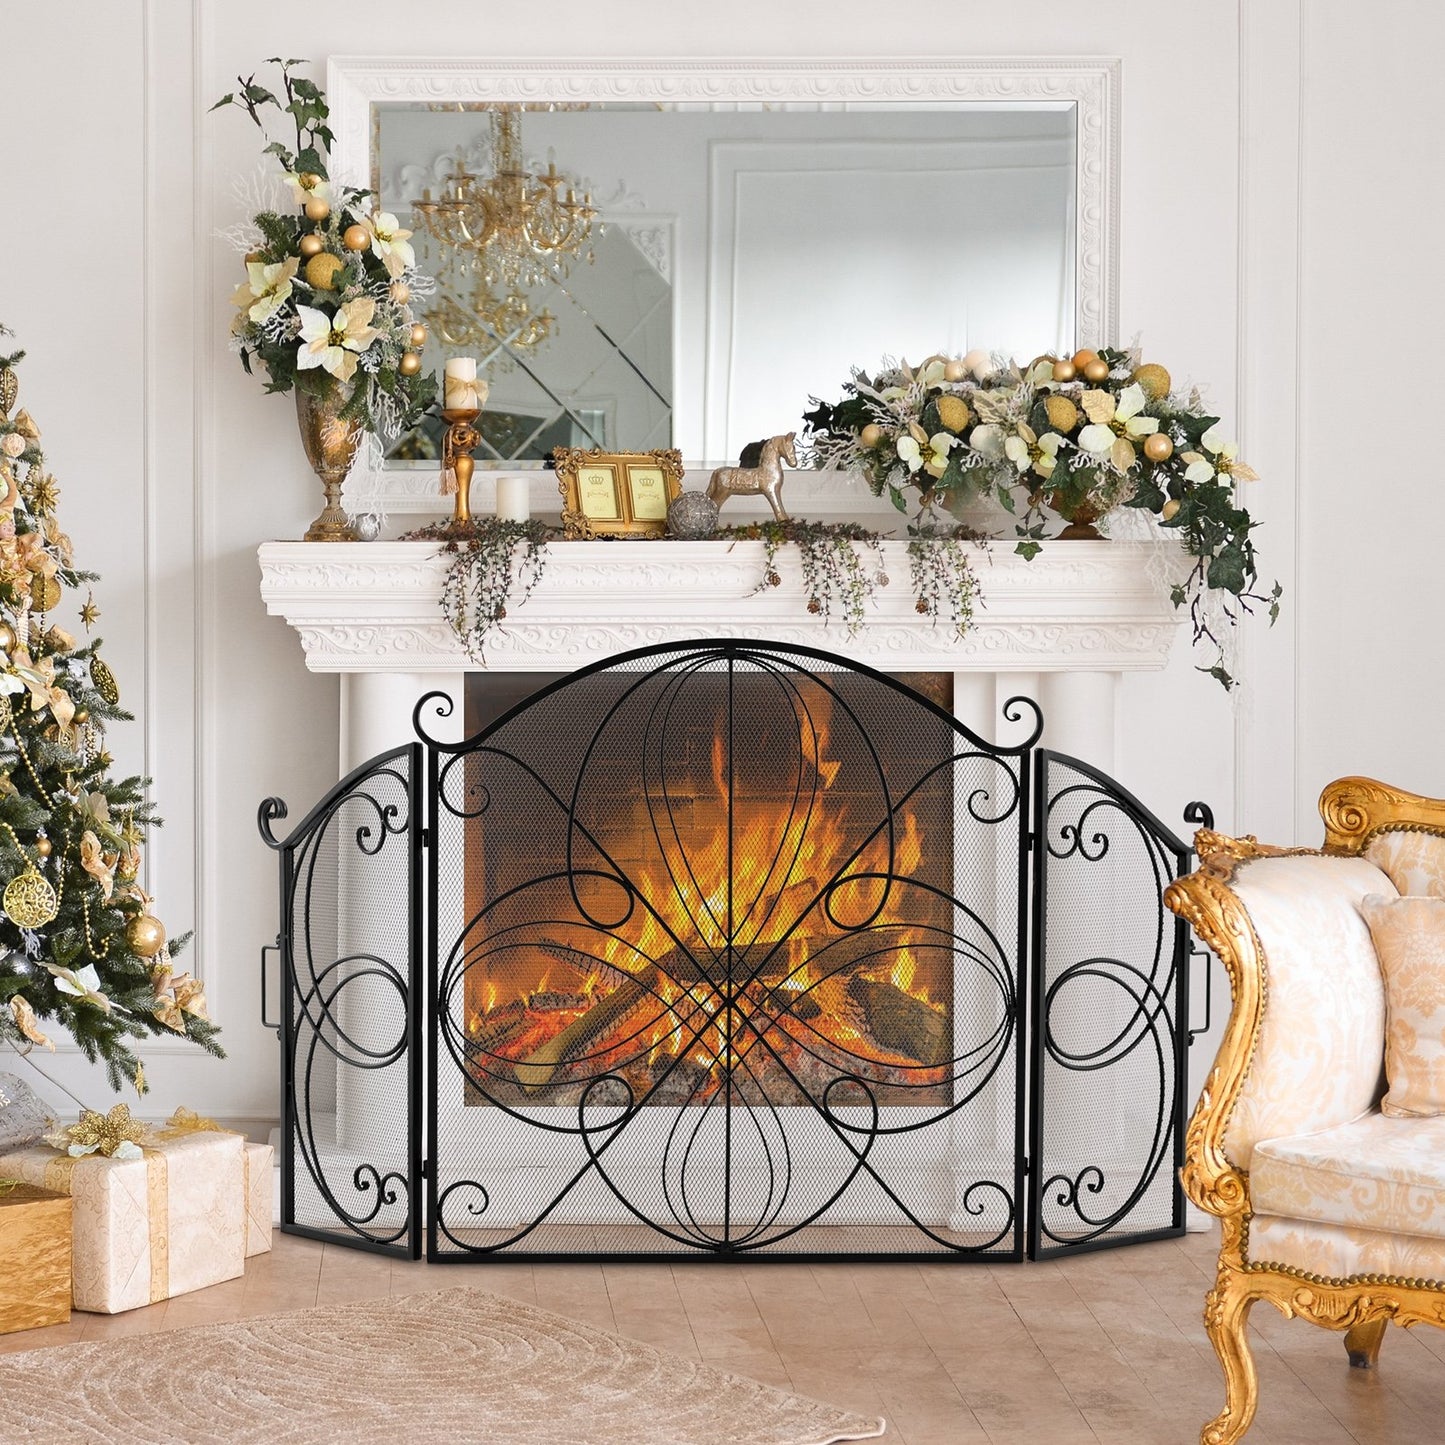 59.5 x 32.5 Inch Fireplace Screen with Floral Pattern, Black